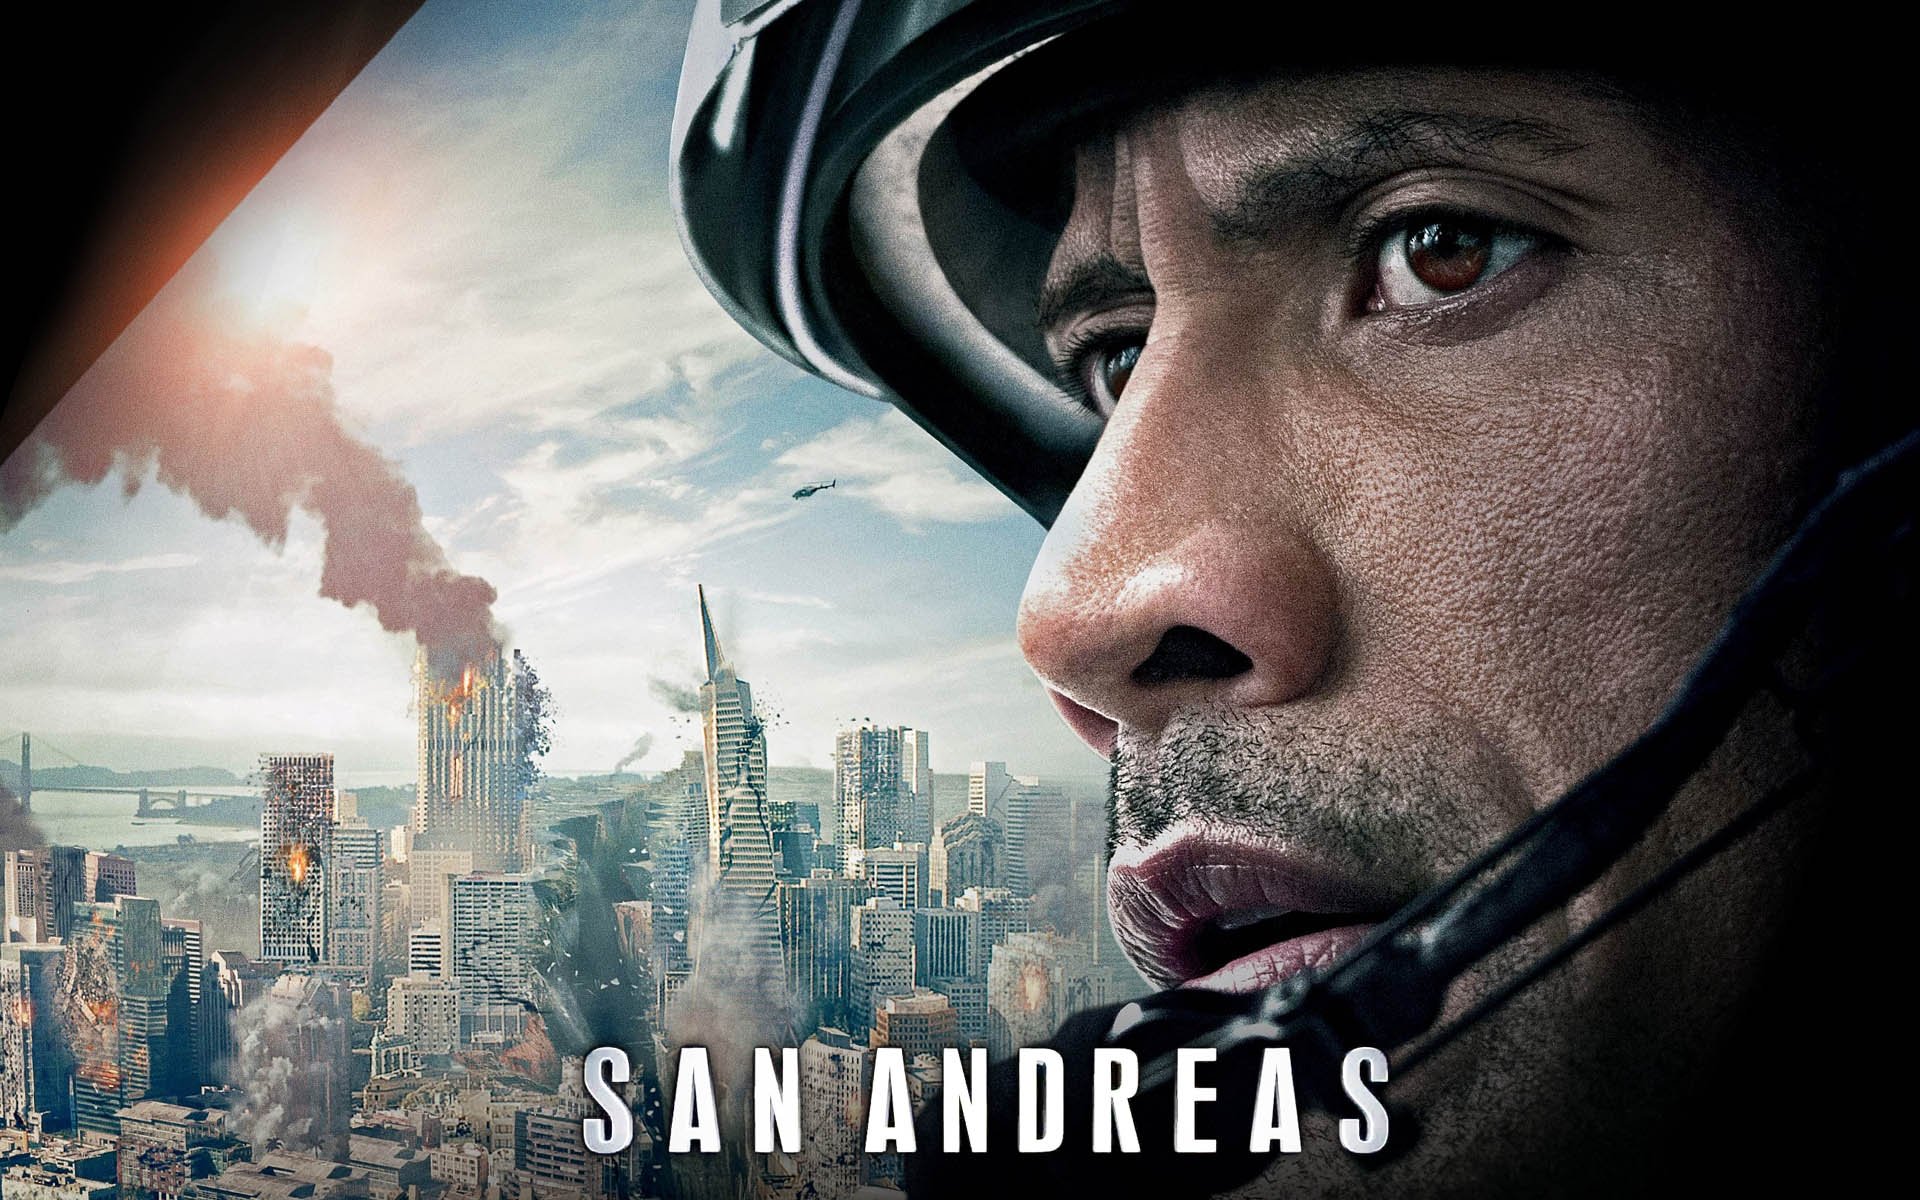 728236 San Andreas Action Earthquake Disaster Adventure Apocalyptic Rock Wwe Drama Thriller Poster 